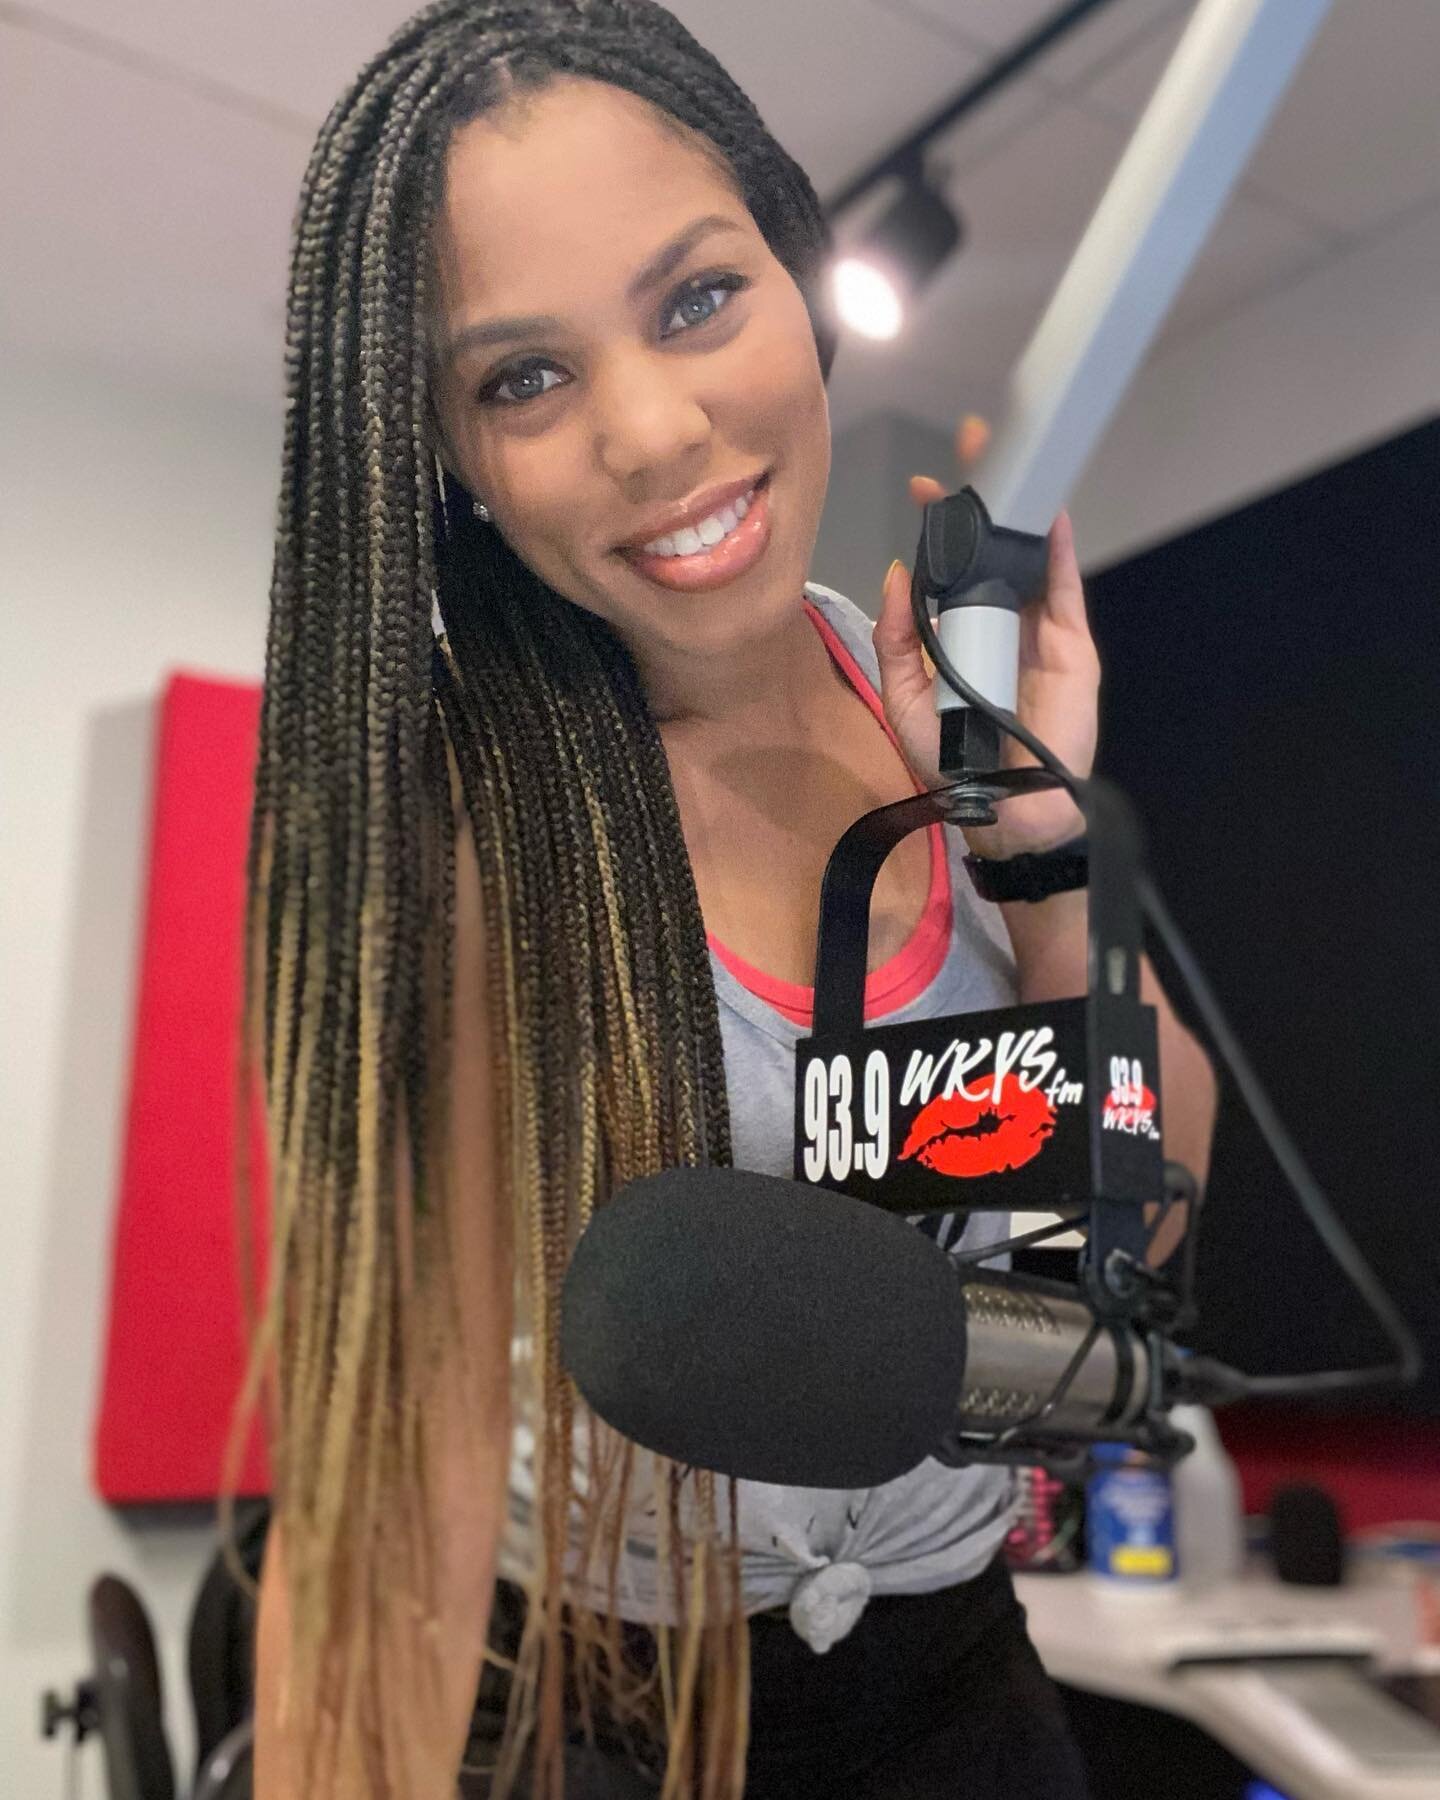 Whew Chile my morning was #GHETTO 😫😫😫😫😫😫😫But the show must go on 😉. Sooooooo turn me up #DMV on @939wkys, #804 on  @ipowerrichmond and #704 on @927theblock . 🙌🏽🙌🏽🙌🏽